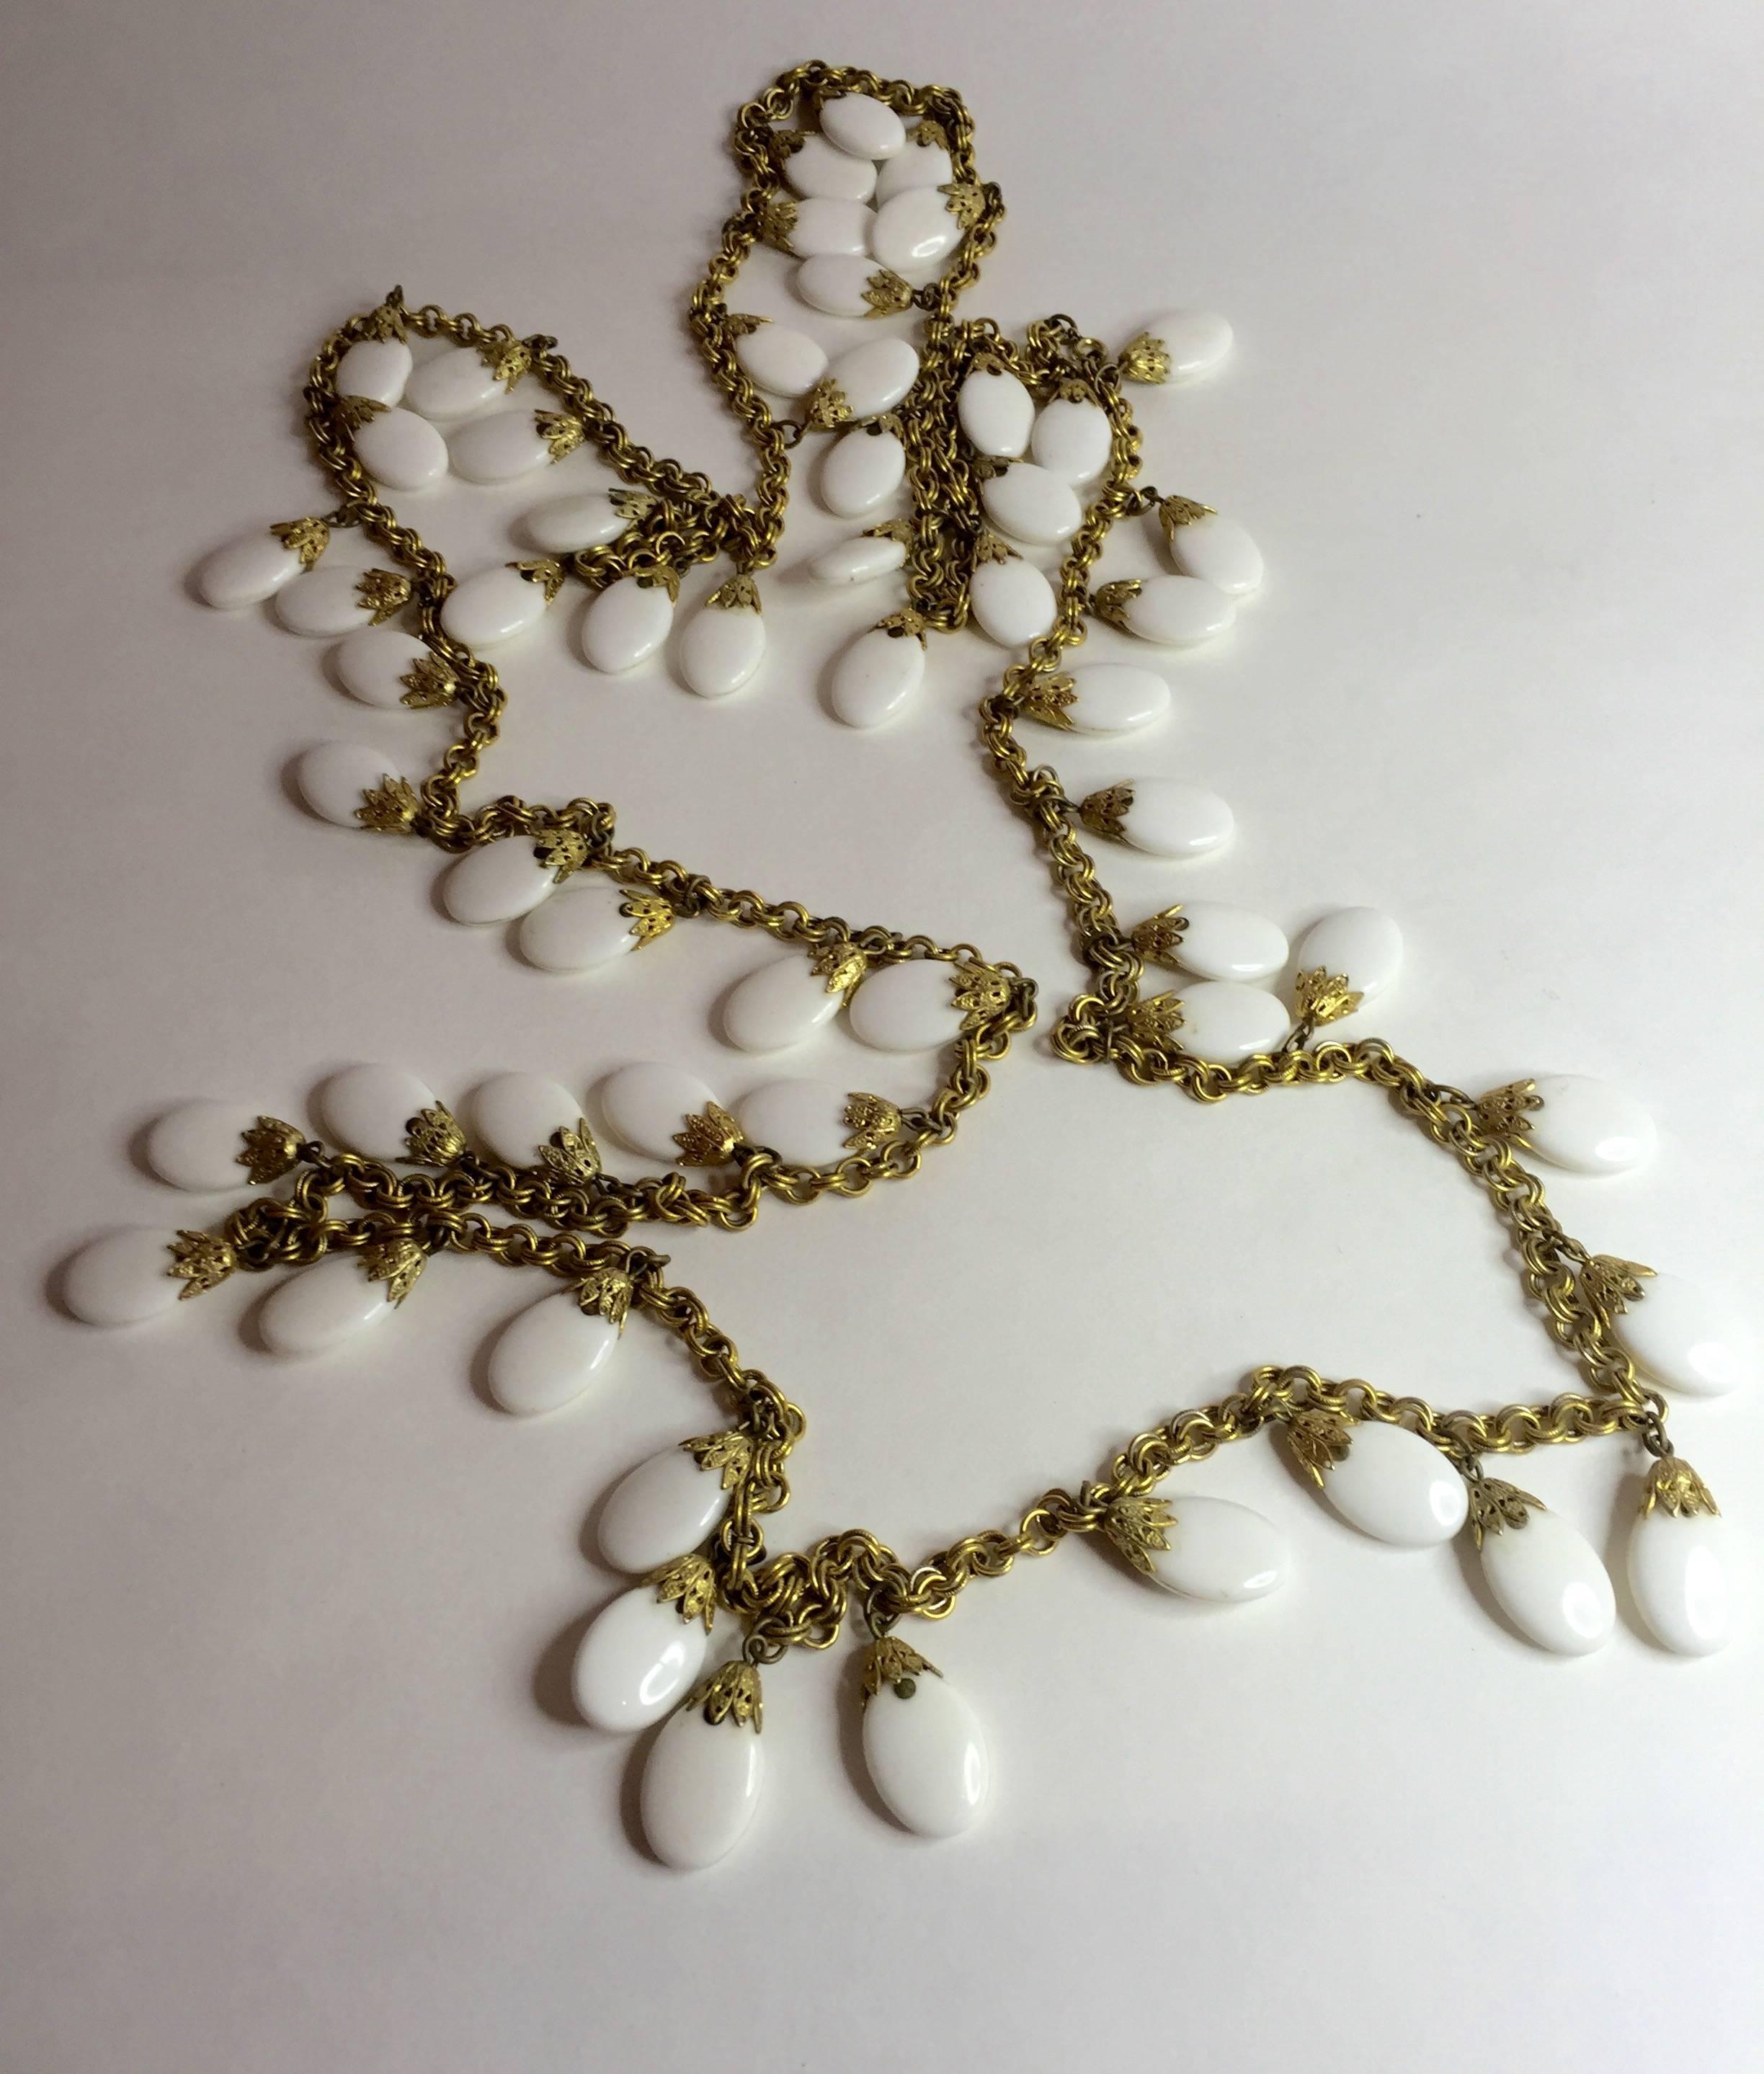 This 1960s NAPIER 82" Long Gold chain and White Resin Opera length Necklace/Earrings is a wonderful, wearable set by this well known and respected maker of fine costume jewelry. The stunning extra long length allows the wearer to wrap the